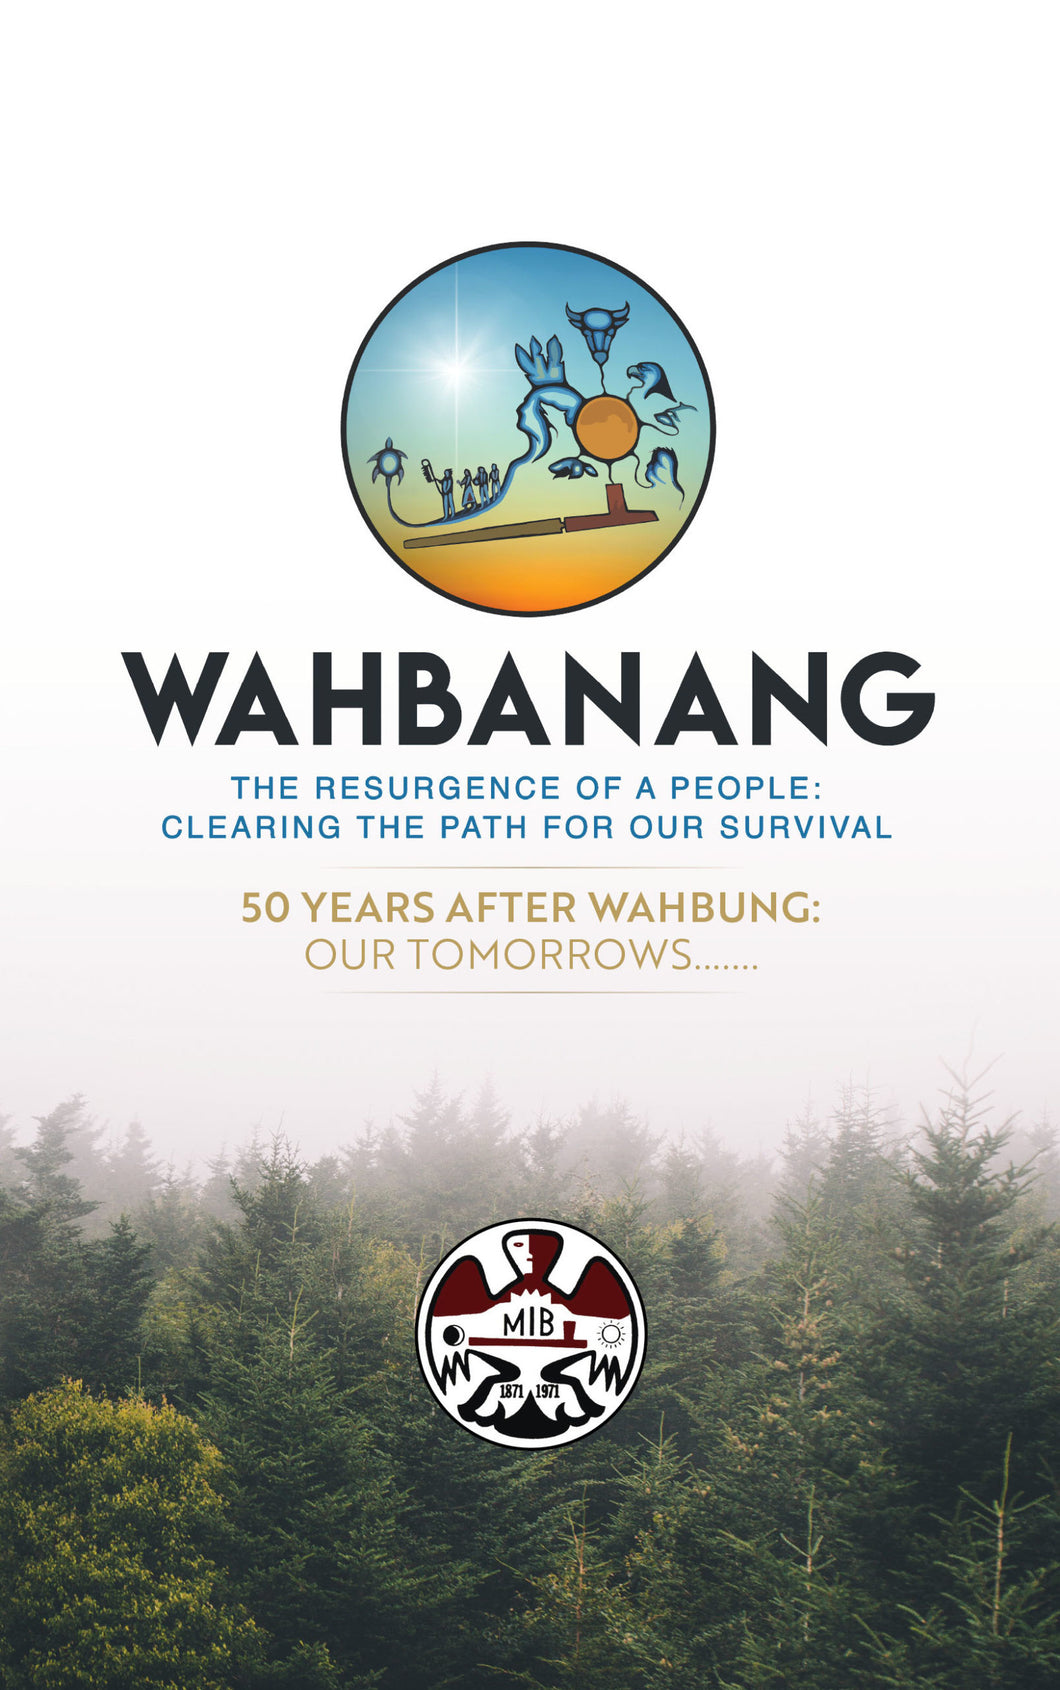 Wahbanang: The Resurgence of a People - Clearing the Path for Our Survival [Dr. David Courchene, Jr., Chief Harry Bone, Florence Paynter, Philip Paynter, et al]